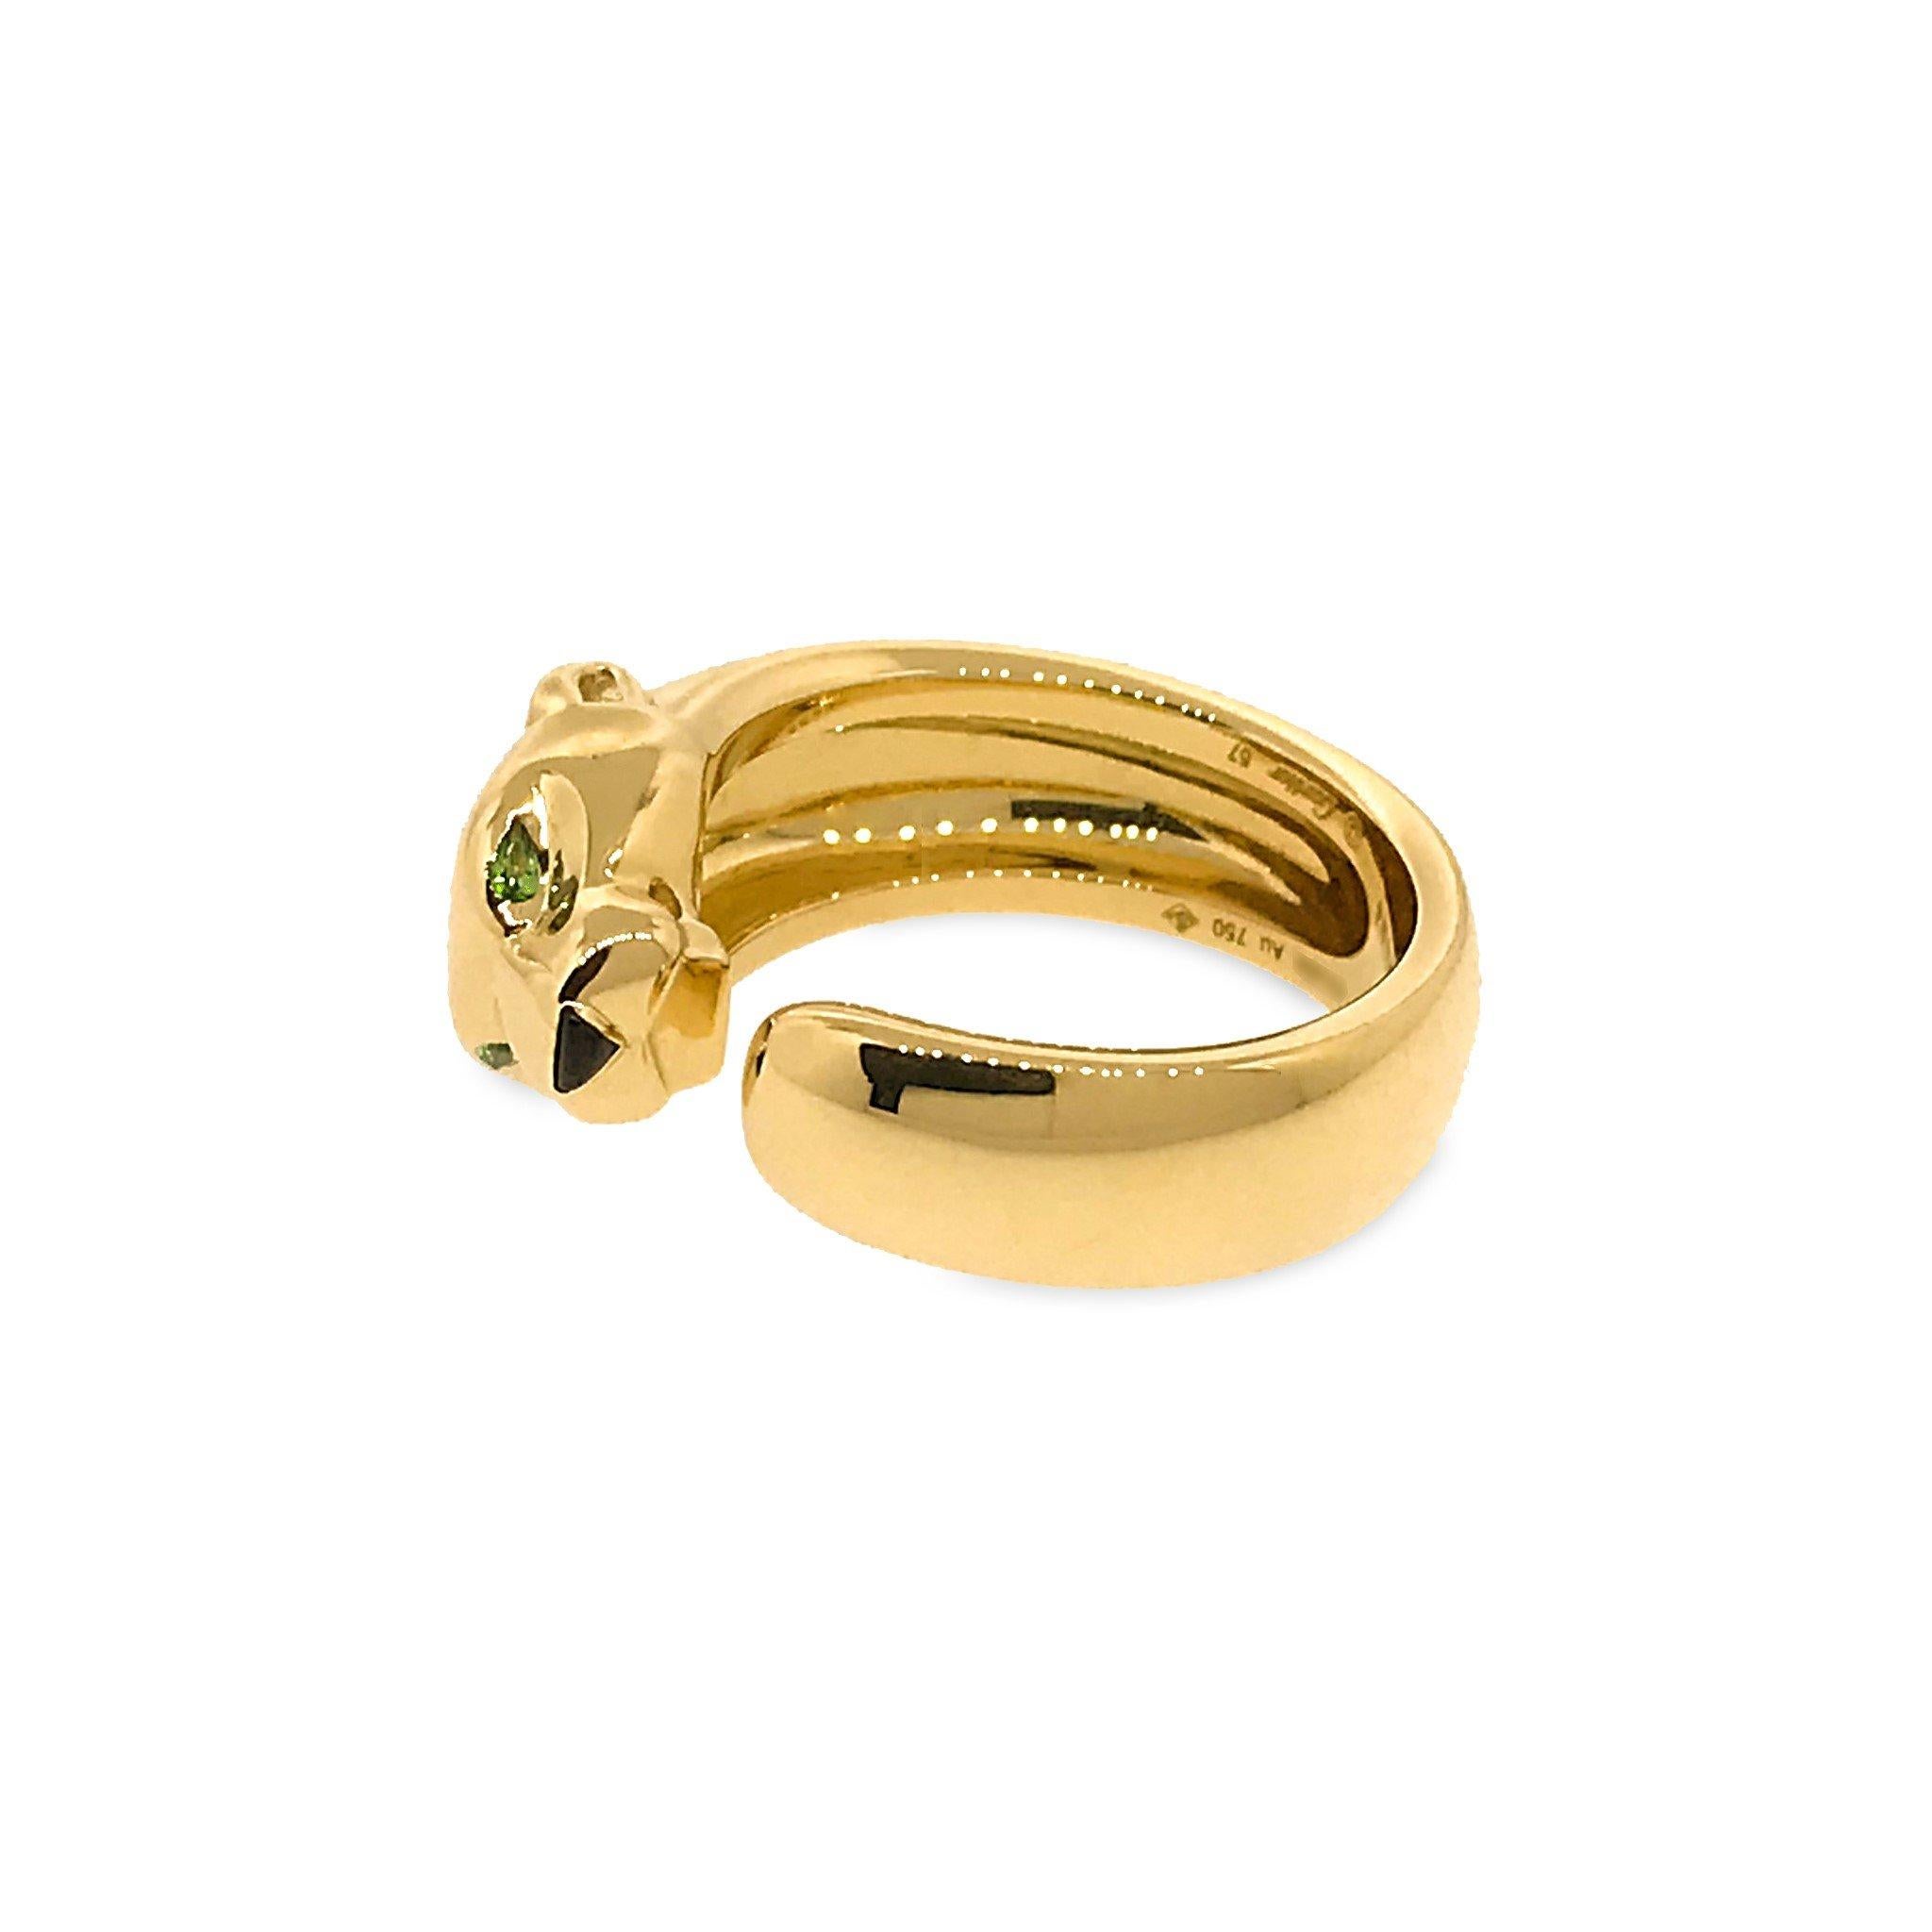 METAL TYPE: 18K Yellow Gold
TOTAL WEIGHT: 17.5g
RING SIZE: 8 / EU 57
REFERENCE #: 21545-AKLK
CONDITION: Pre-owned, Excellent condition.